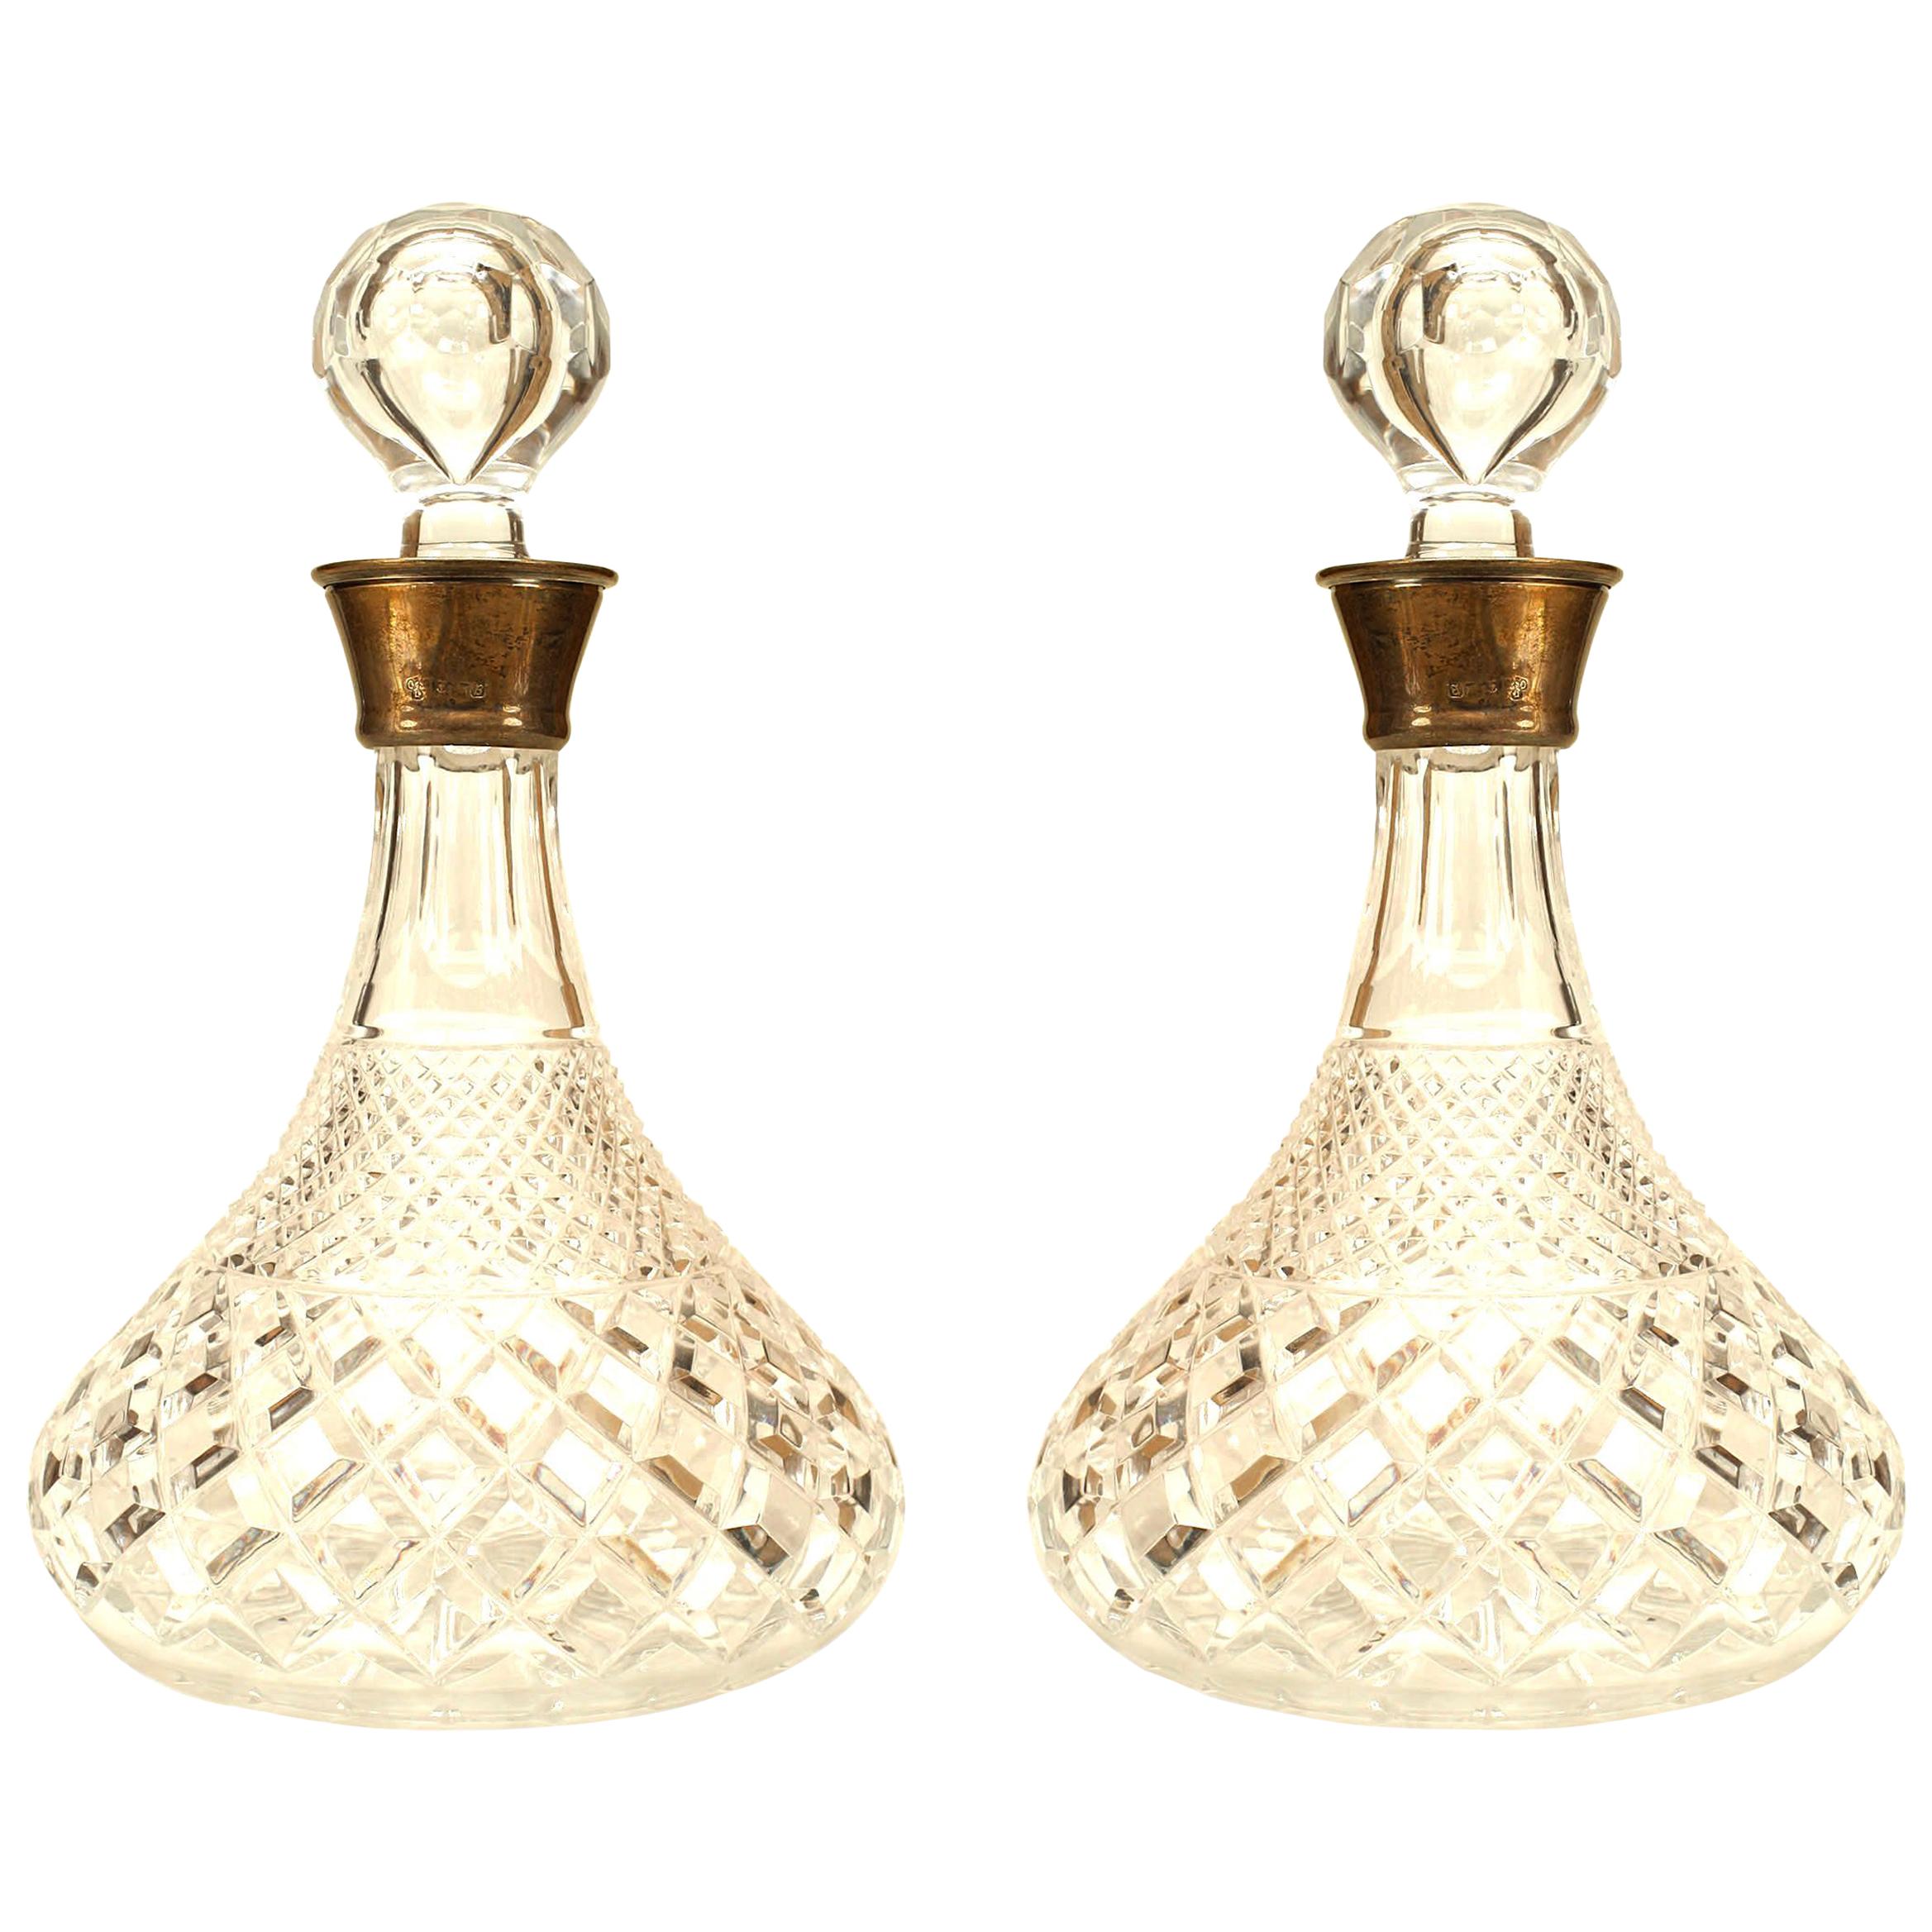 Pair of English Victorian Cut Crystal Decanters